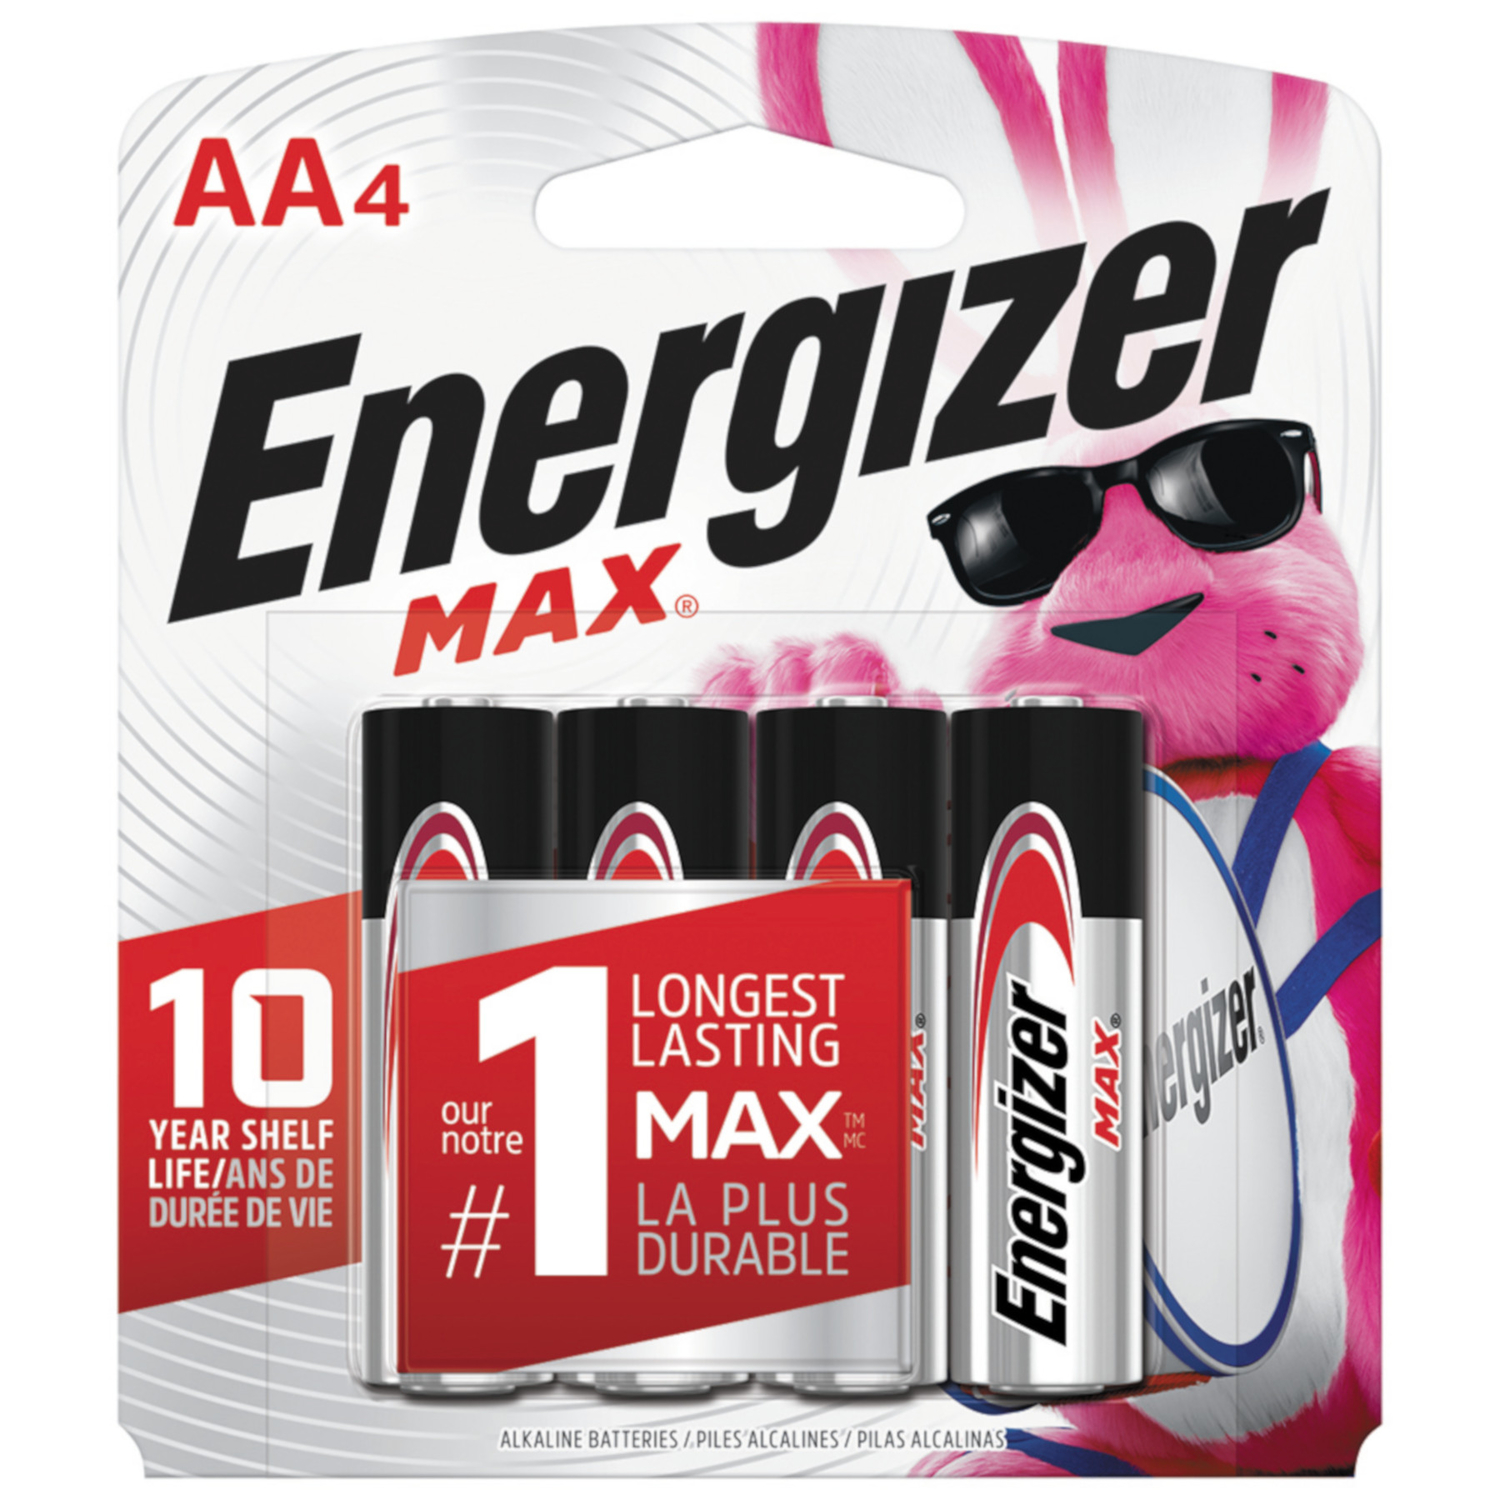 Photos - Household Switch Energizer Max Premium AA Alkaline Batteries 4 pk Carded E91BP-4 